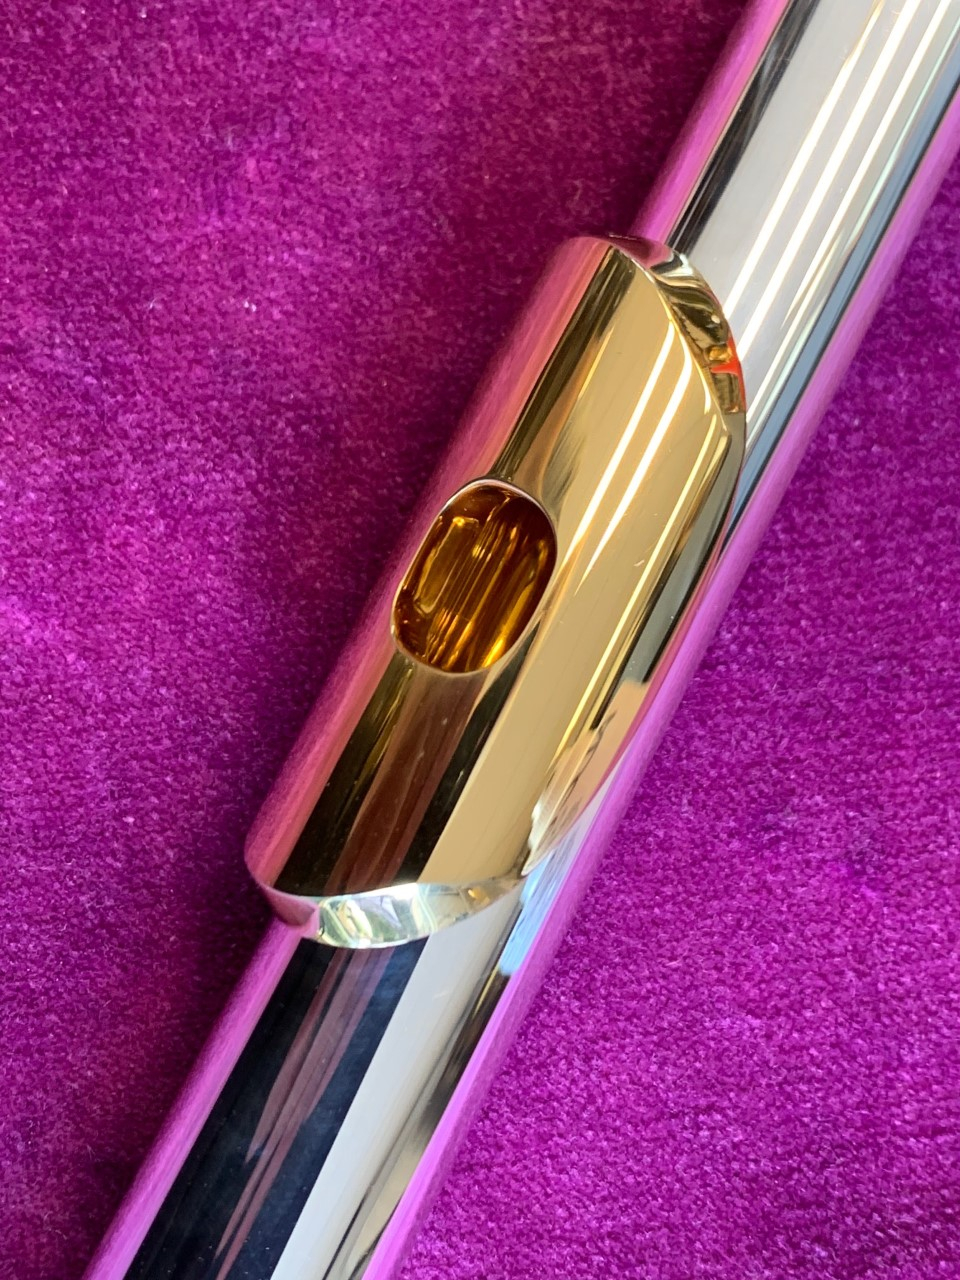 Pearl Flute Headjoint - Vivace .970 Silver - Gold Plated Lipplate, Riser and Crown